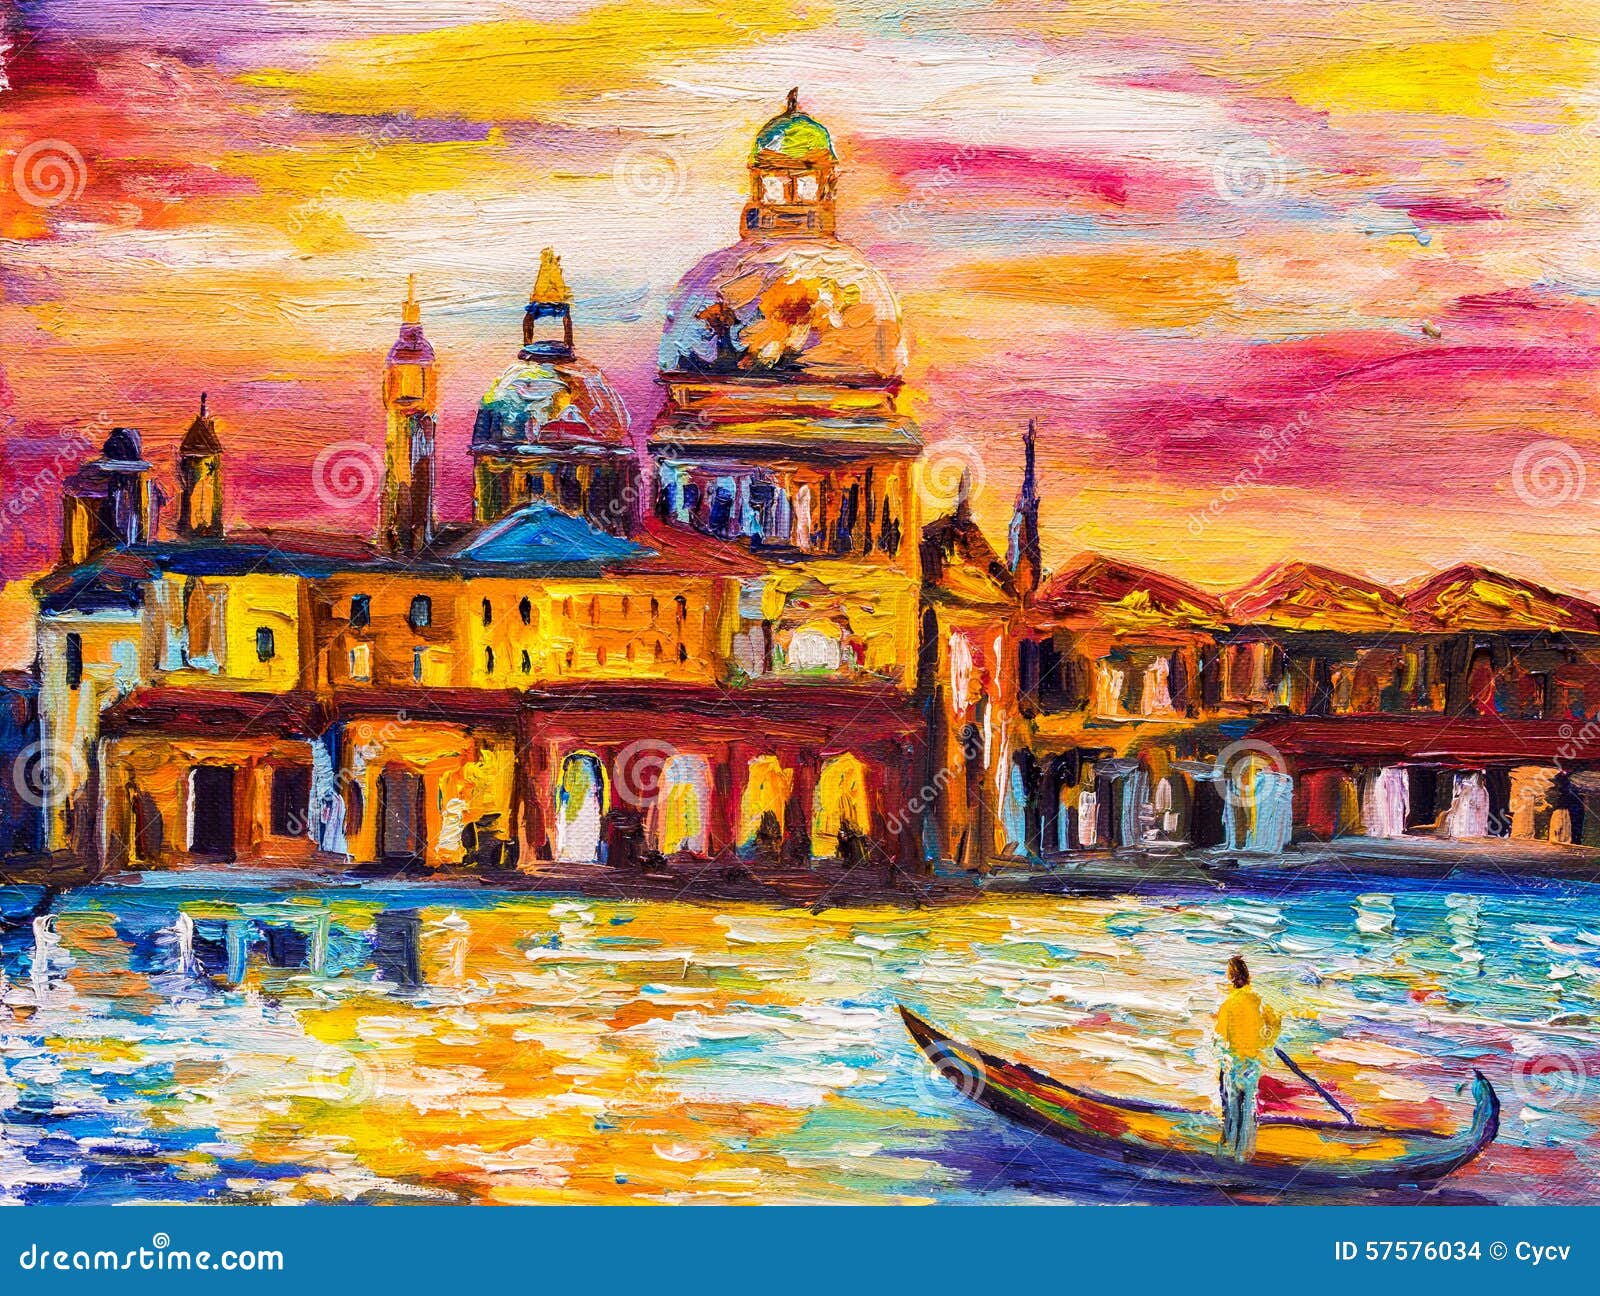 Oil Painting Venice Italy Stock Illustration Image